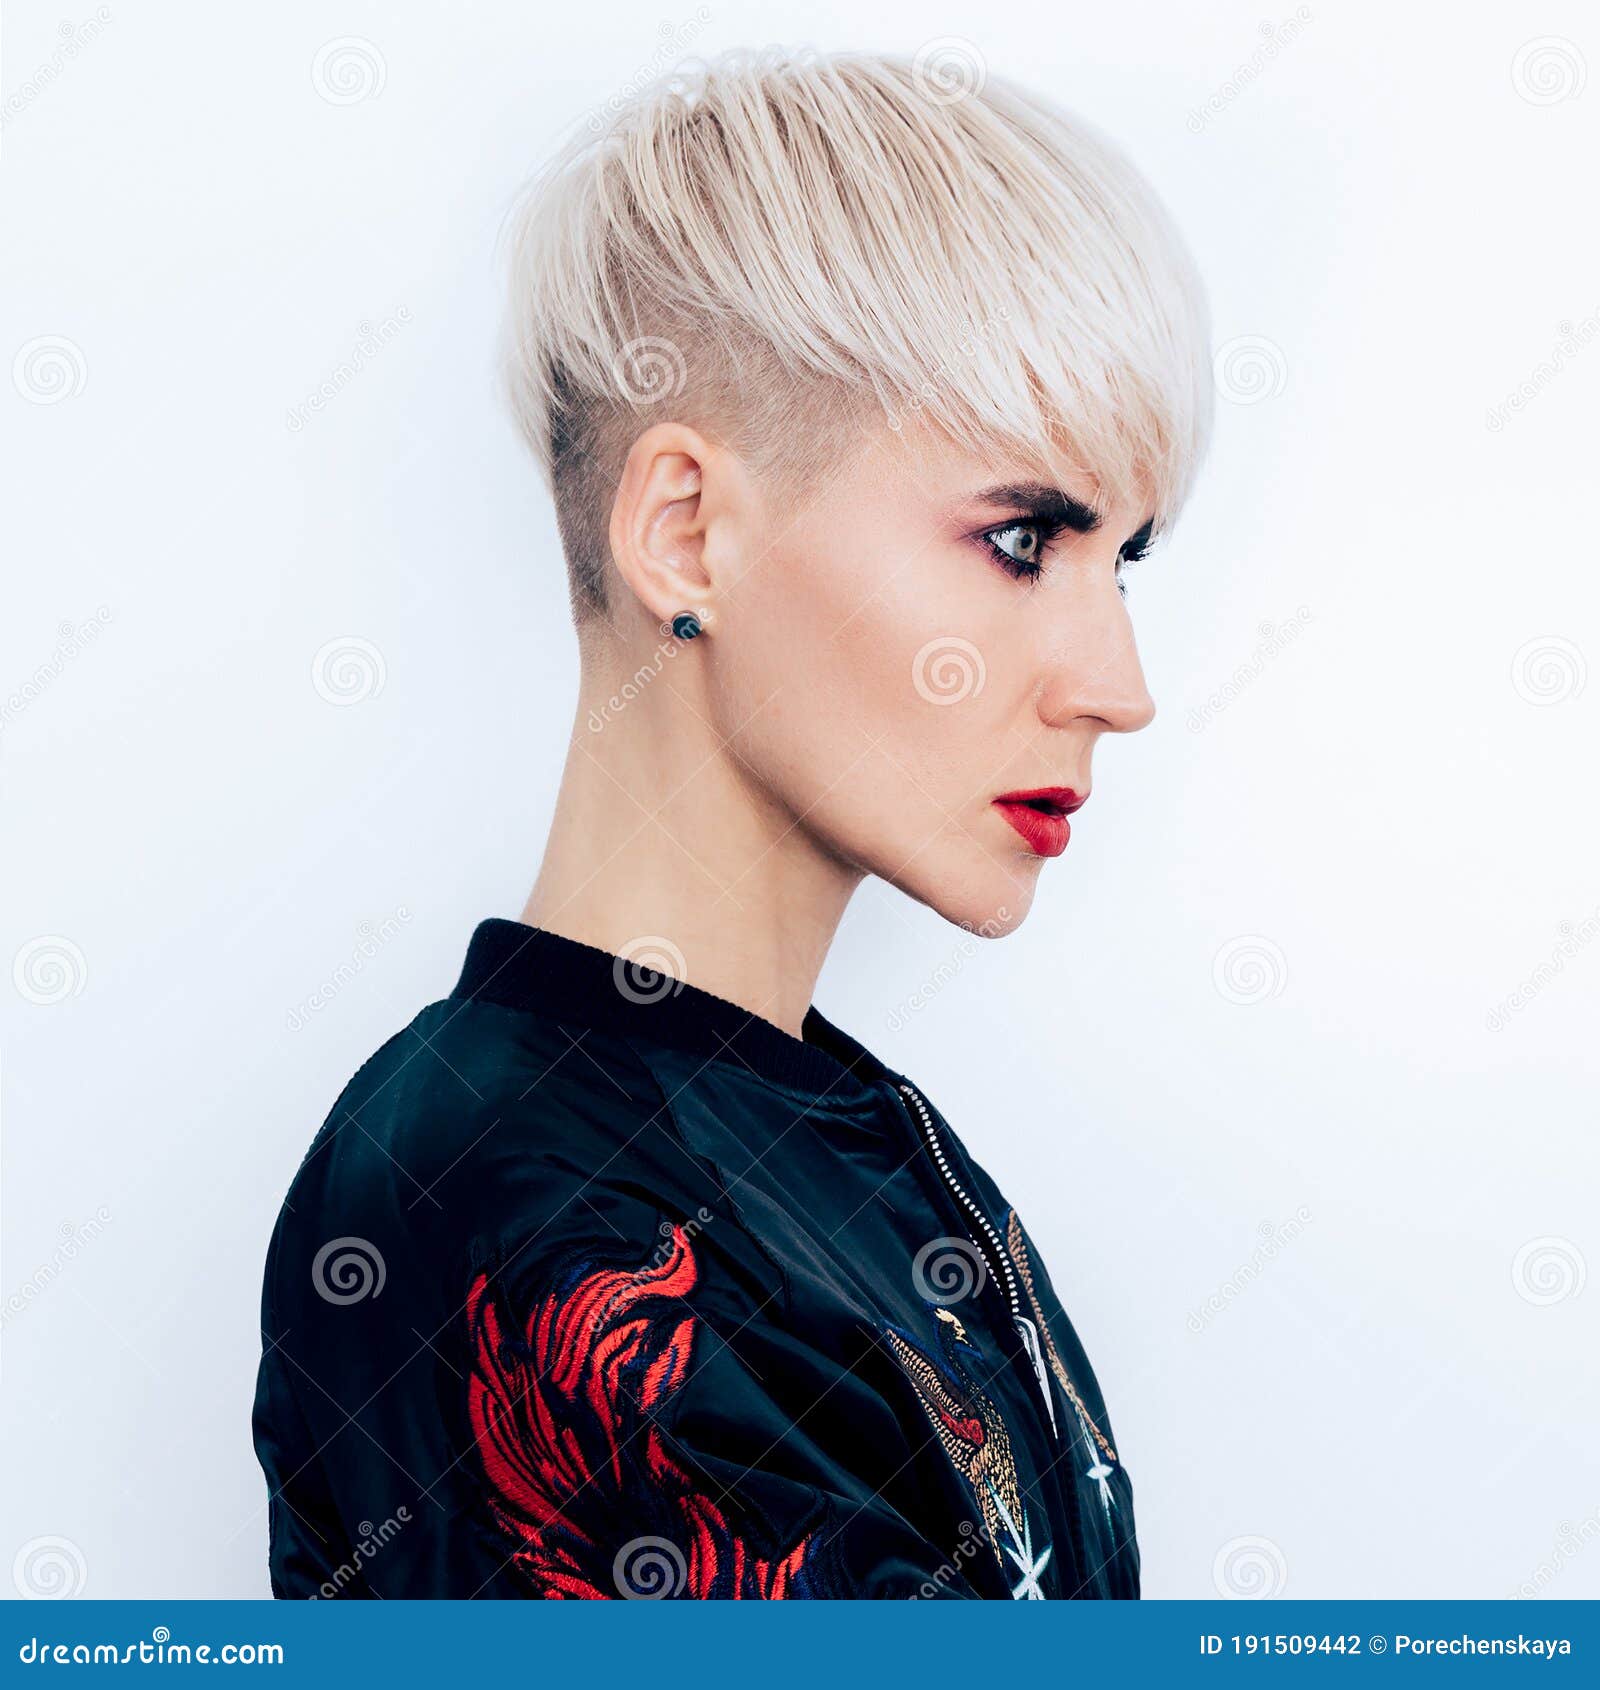 Tomboy Fashion Model with Short Haircut Hair Ideas Trends Stock Photo -  Image of caucasian, fashion: 191509442